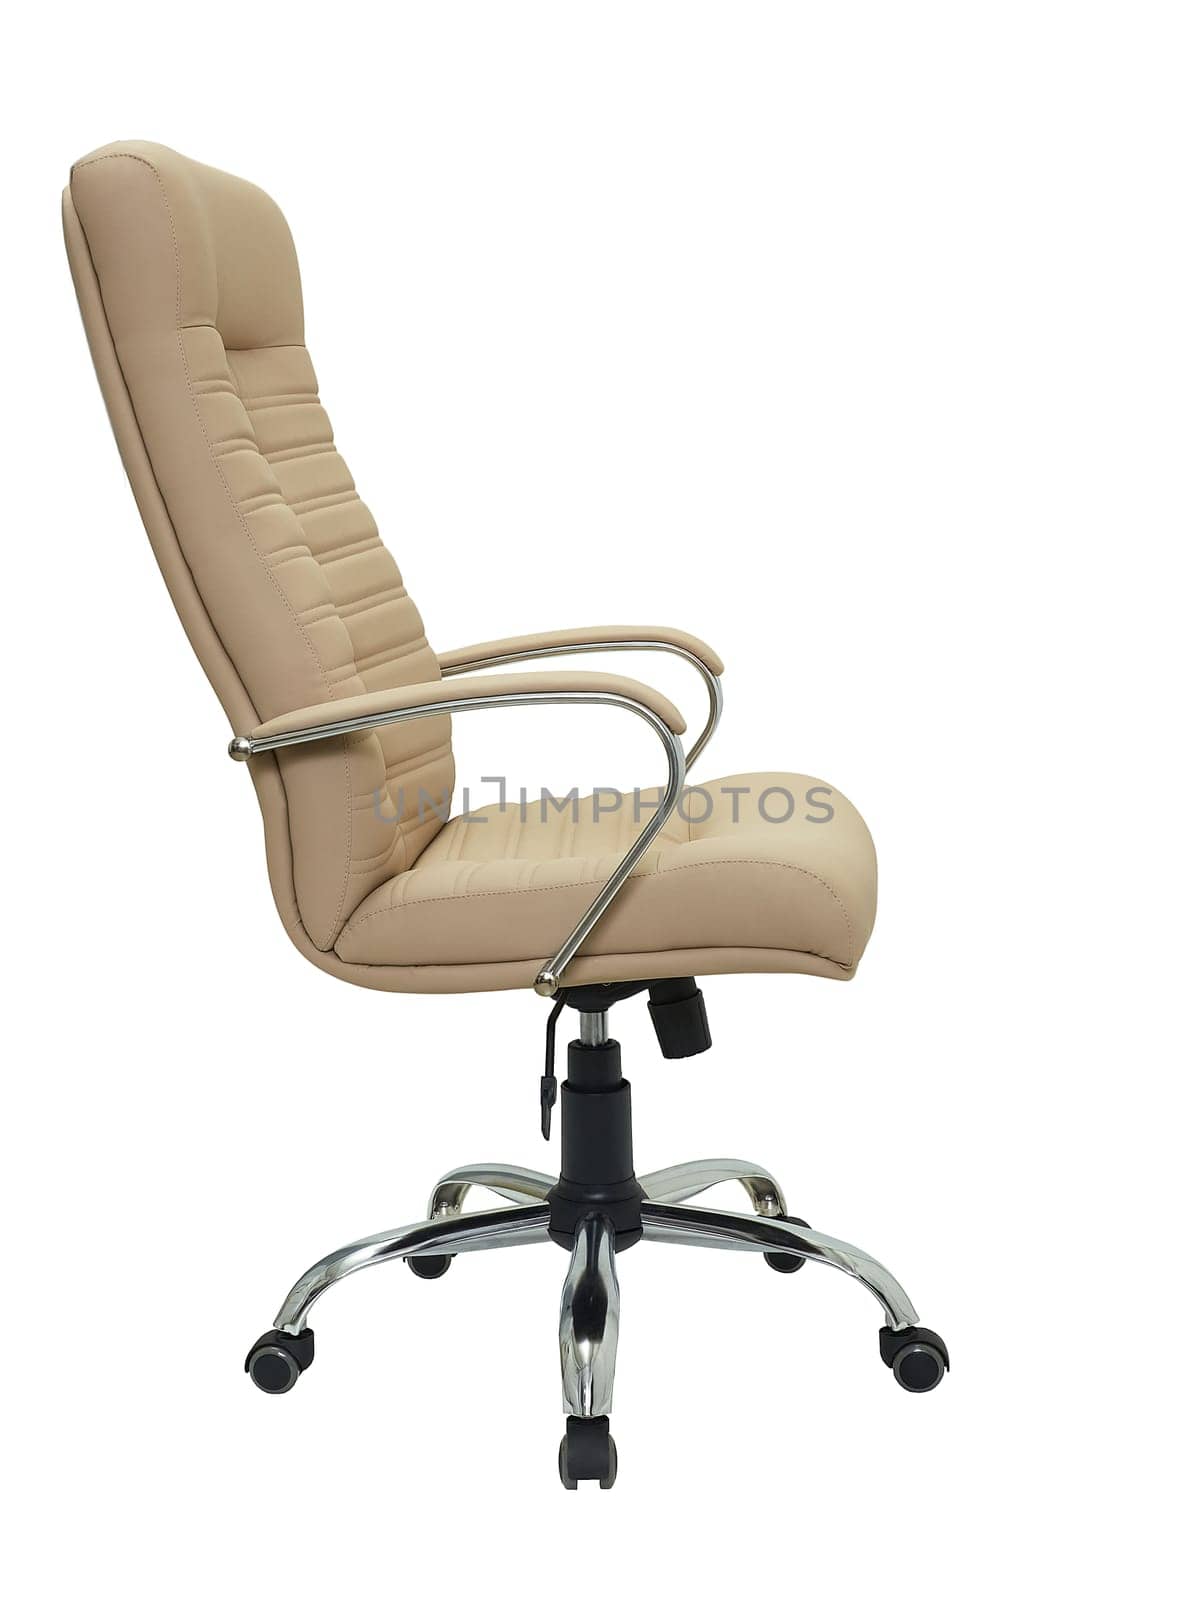 beige office armchair on wheels isolated on white background, side view. by artemzatsepilin